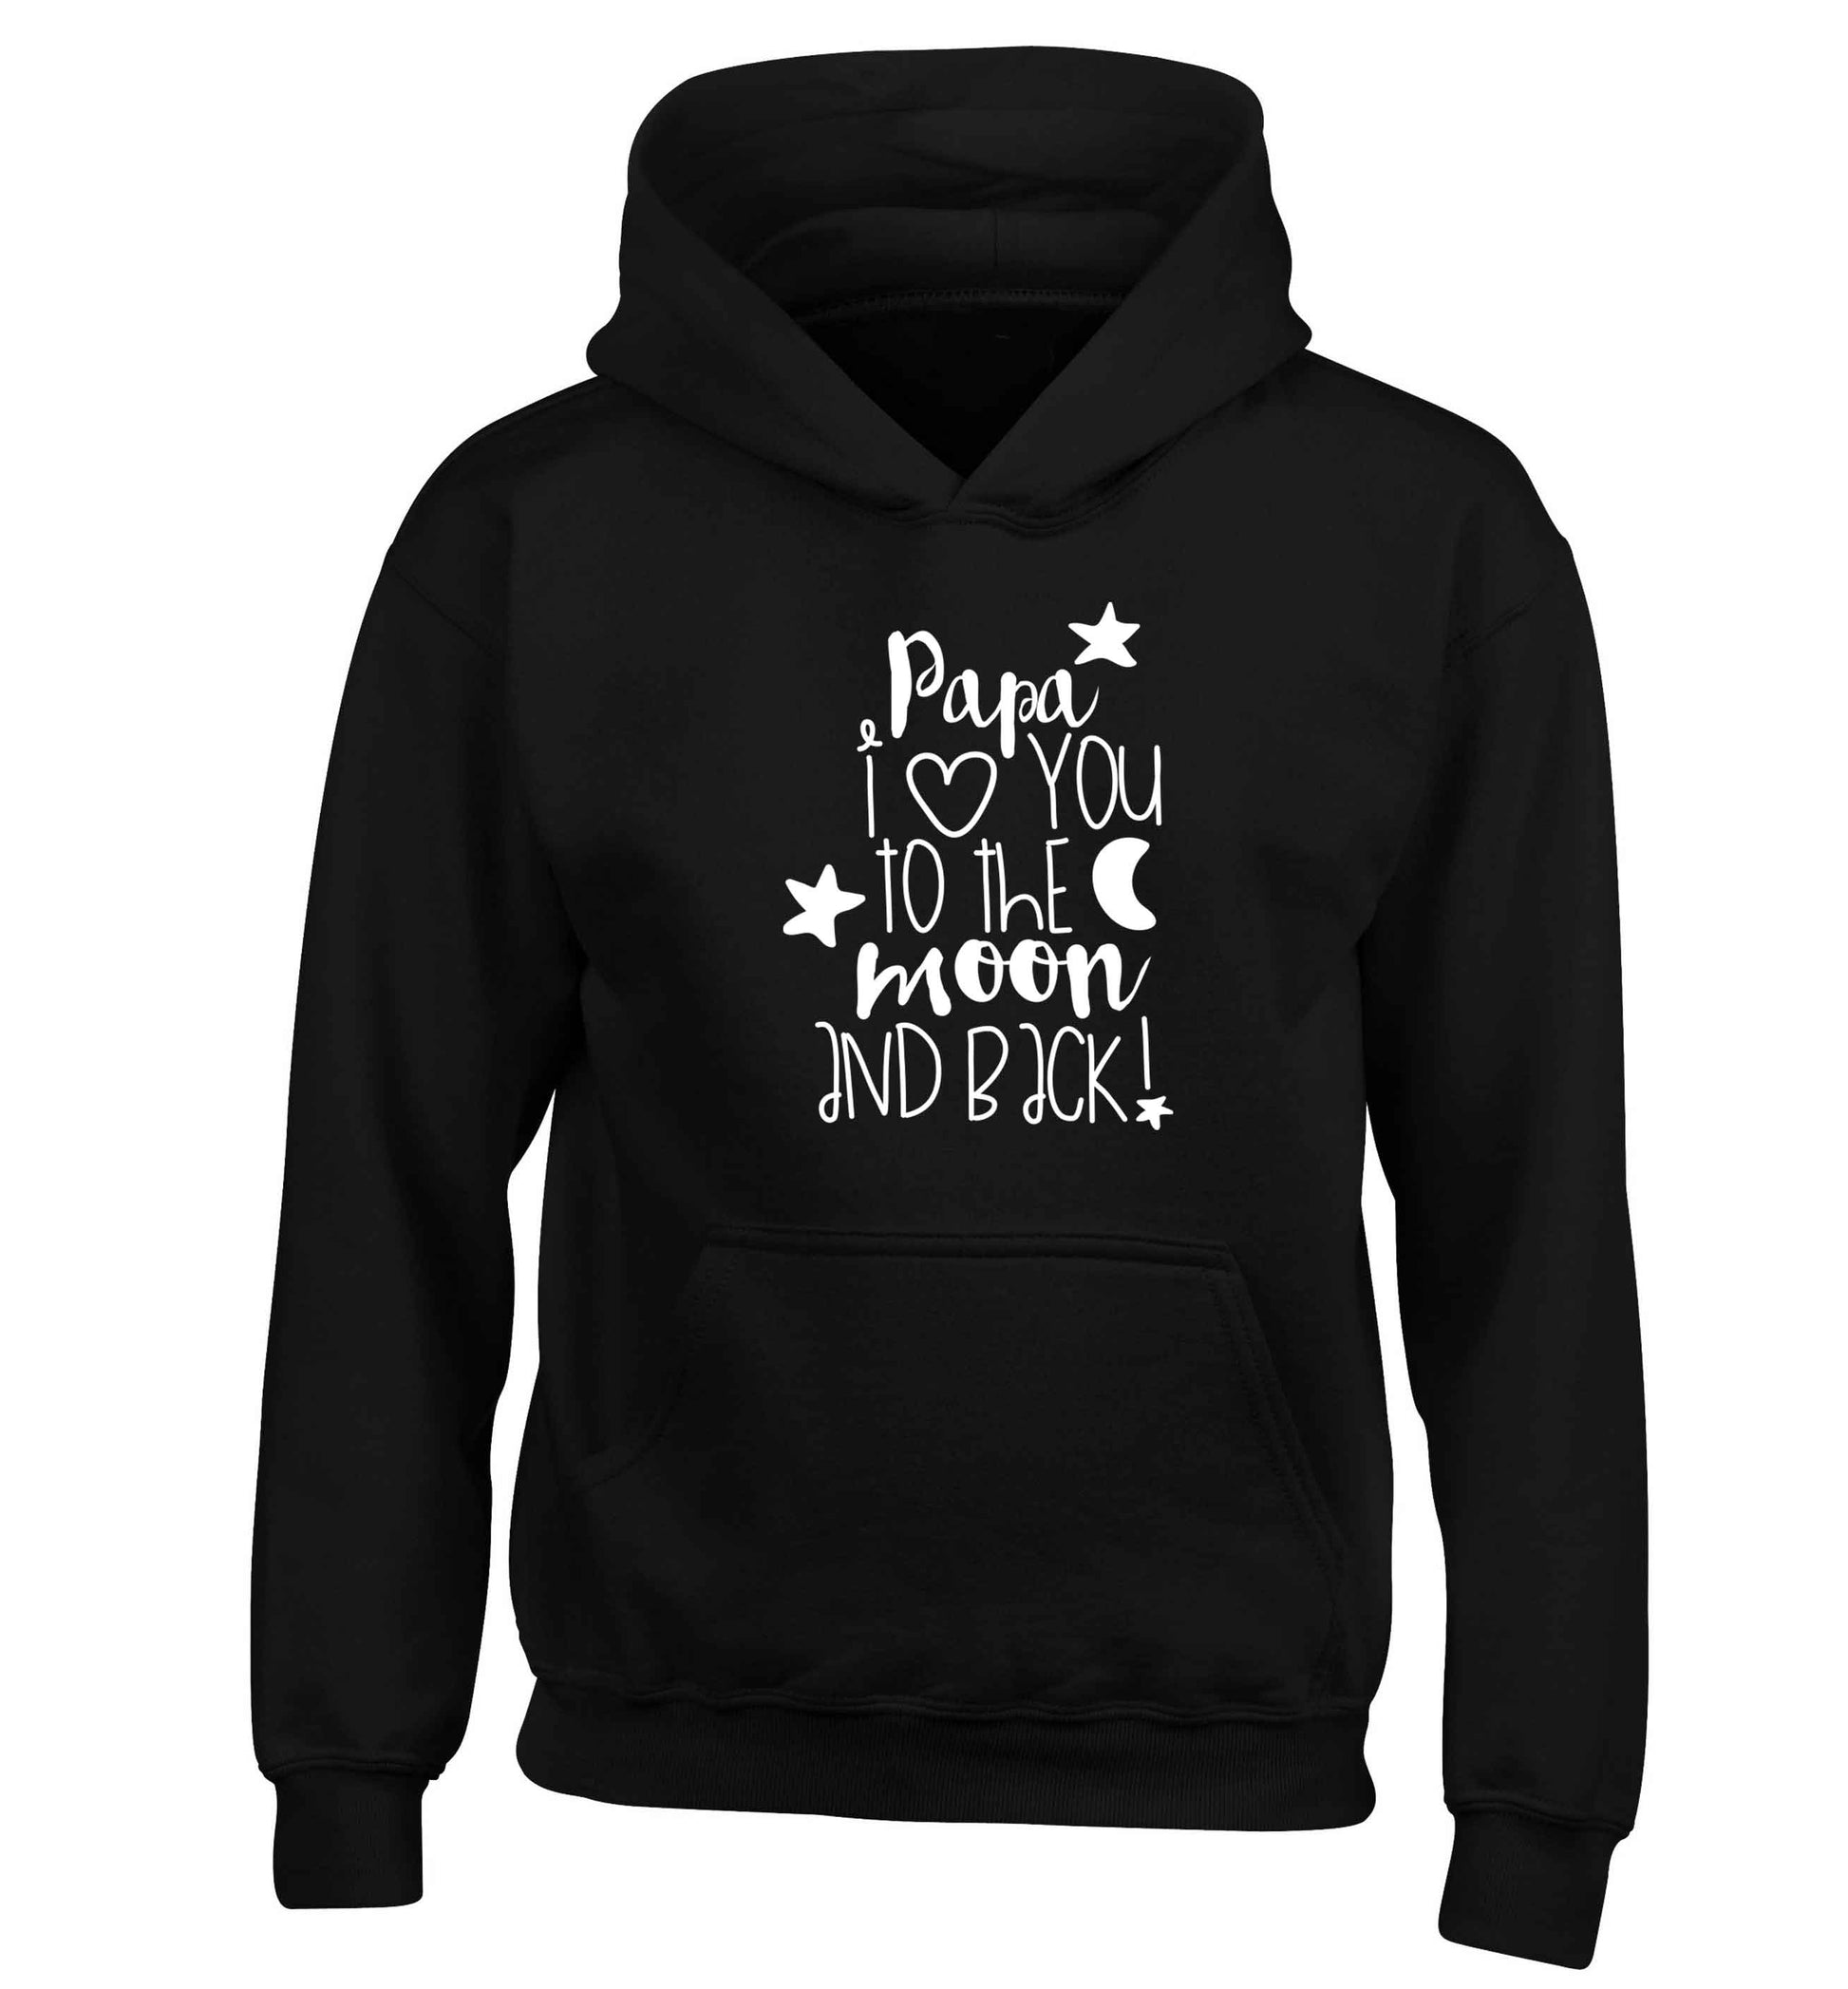 Papa I love you to the moon and back children's black hoodie 12-13 Years